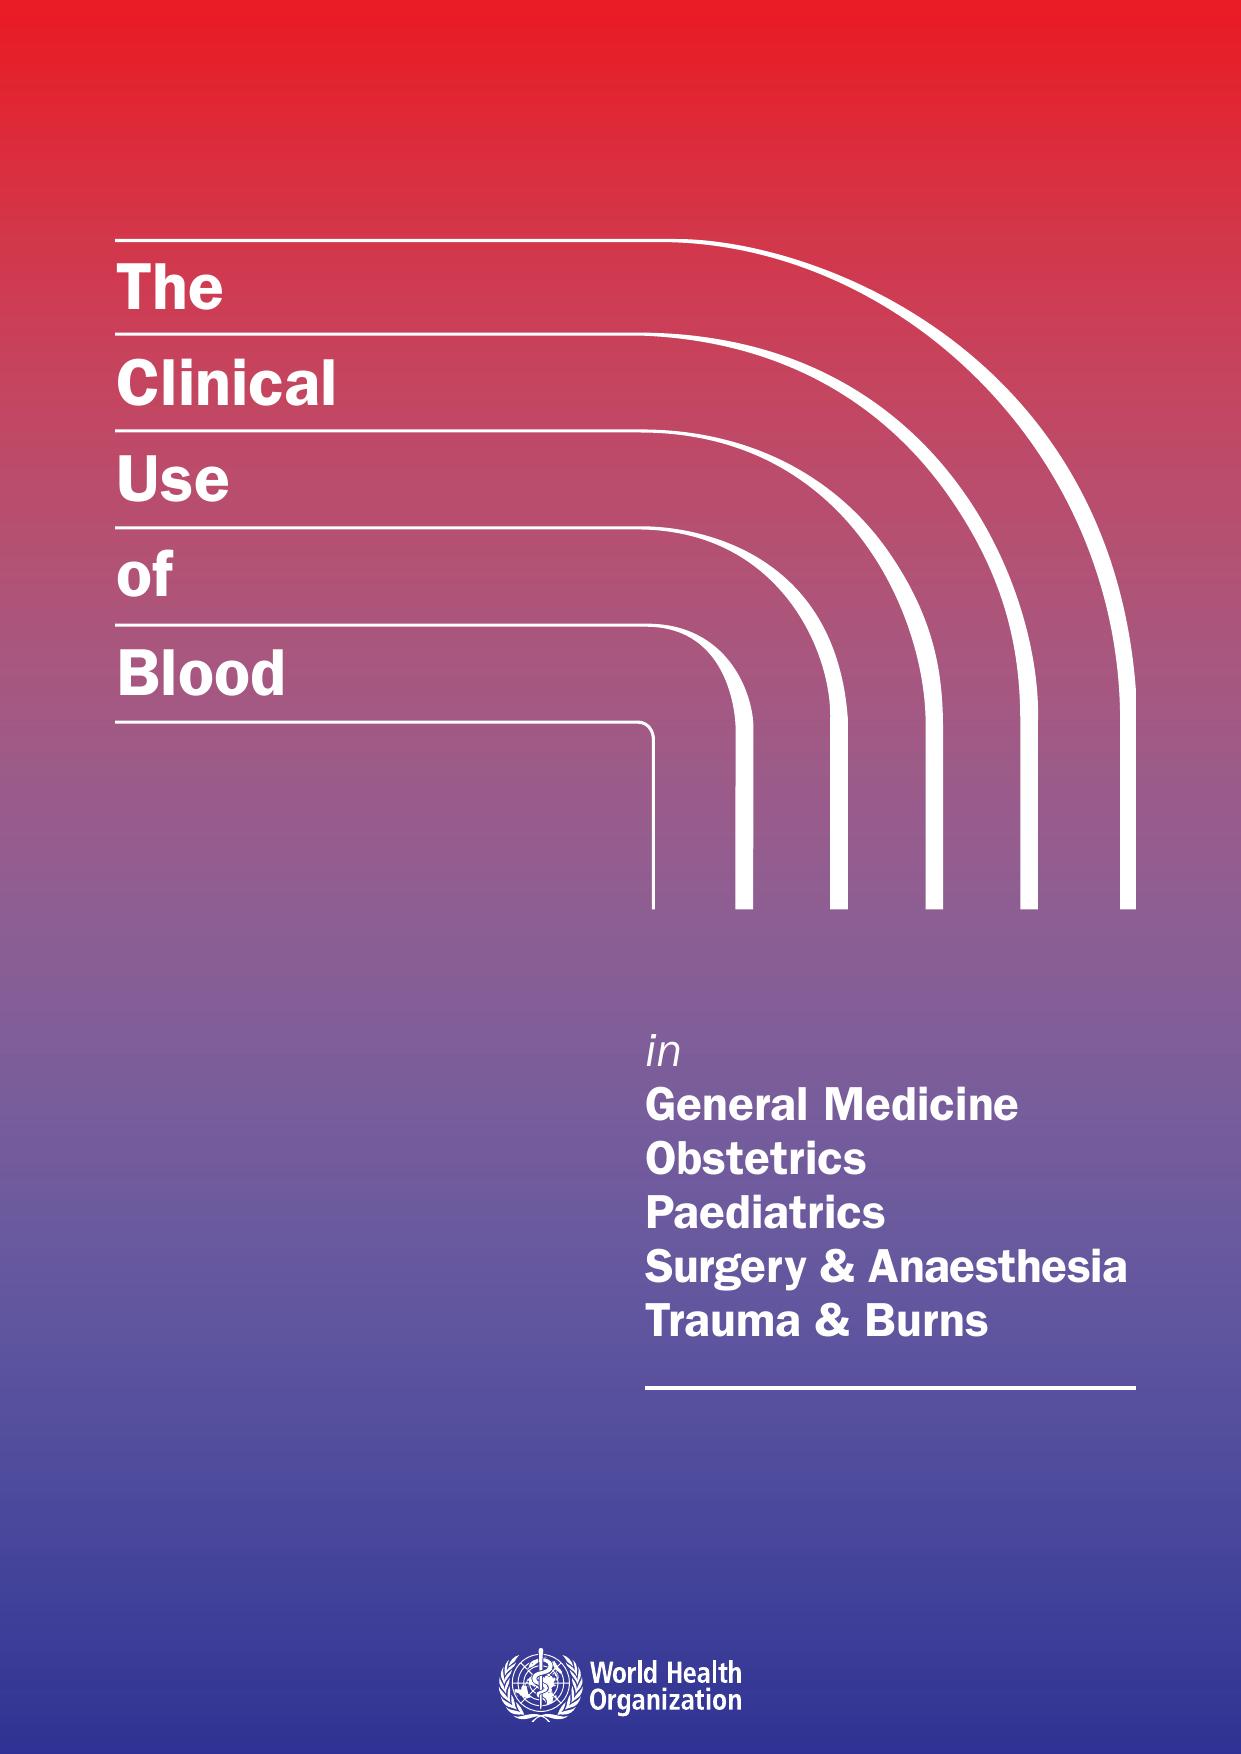 The Clinical Use of Blood